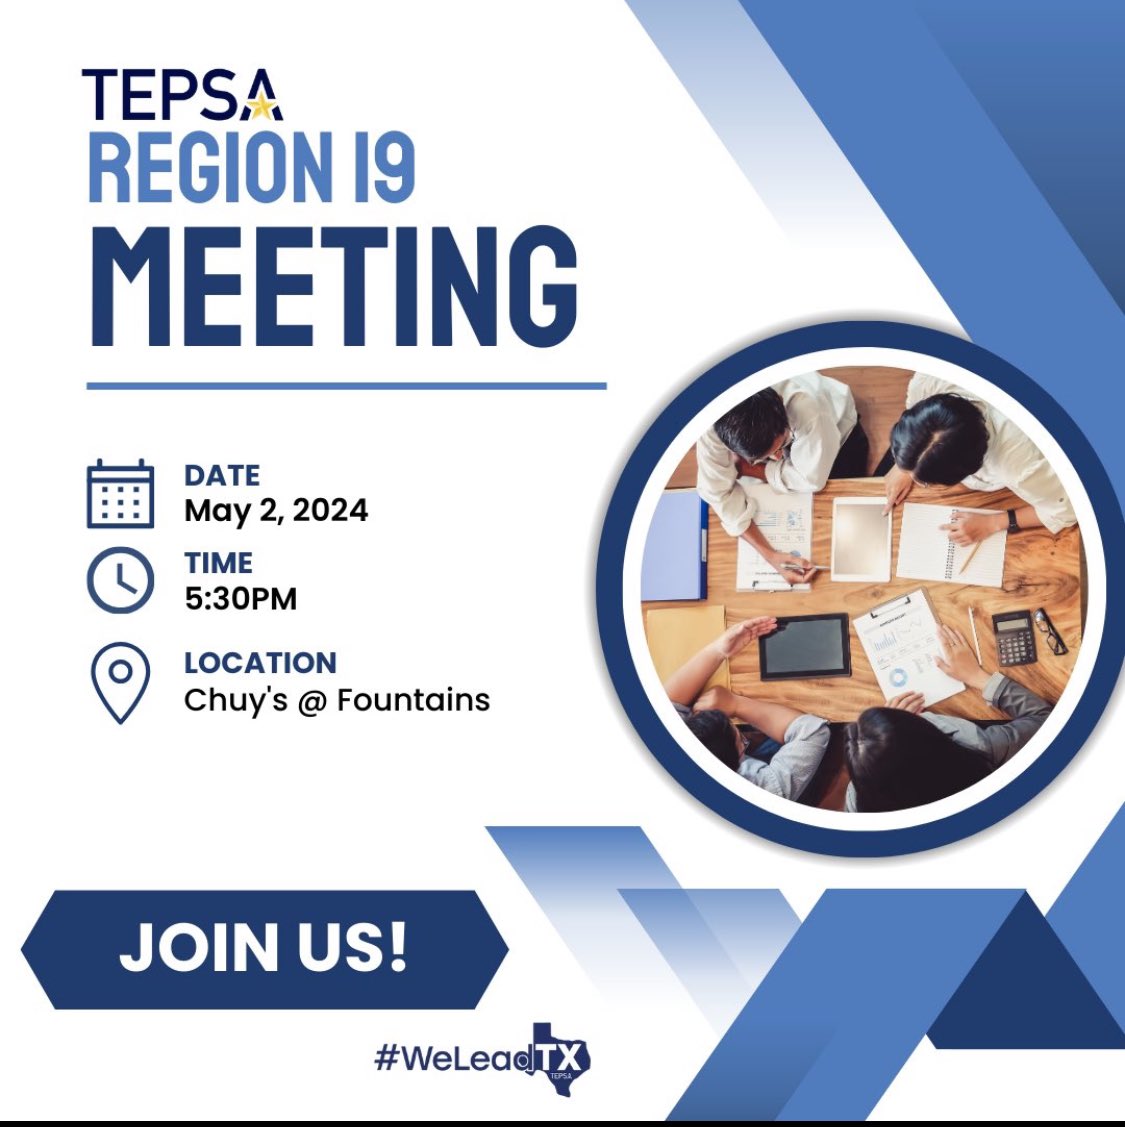 TEPSA Region 19 Spring Meeting is just around the corner!   We would love for you to join us for a fun filled night of networking, member updates & some leadership speed dating 😉!  Make sure to bring a friend. #WeLeadTX #LeadershipMatters @TEPSAtalk